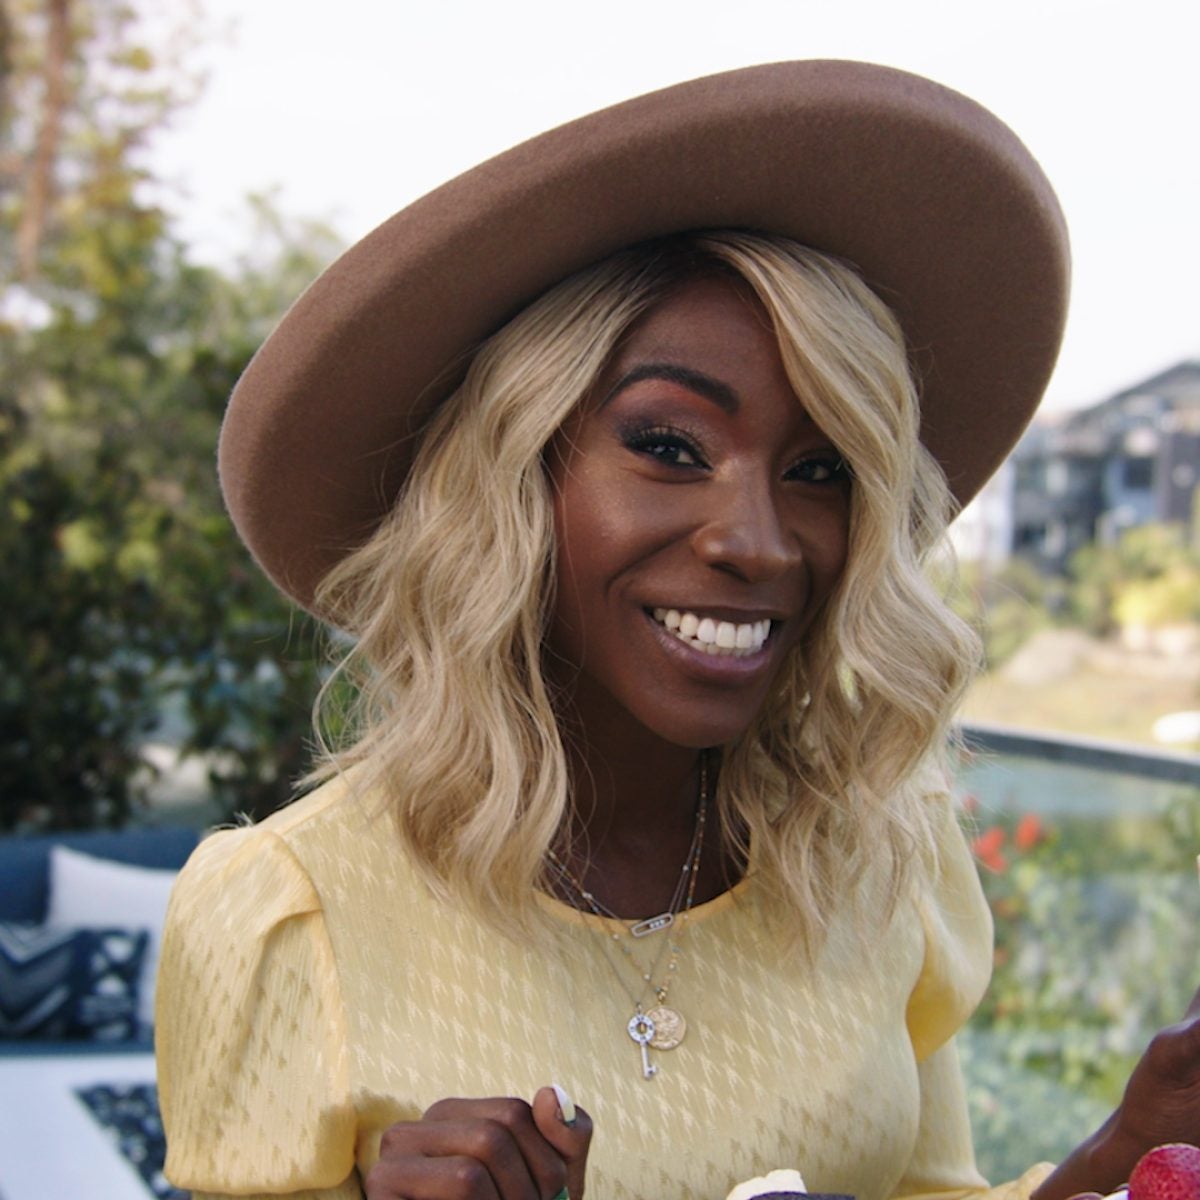 Actress And Bumble User Angelica Ross On Her Biggest Love Lesson And Why Stagnant, 'Unconscious' Men Are A Deal Breaker